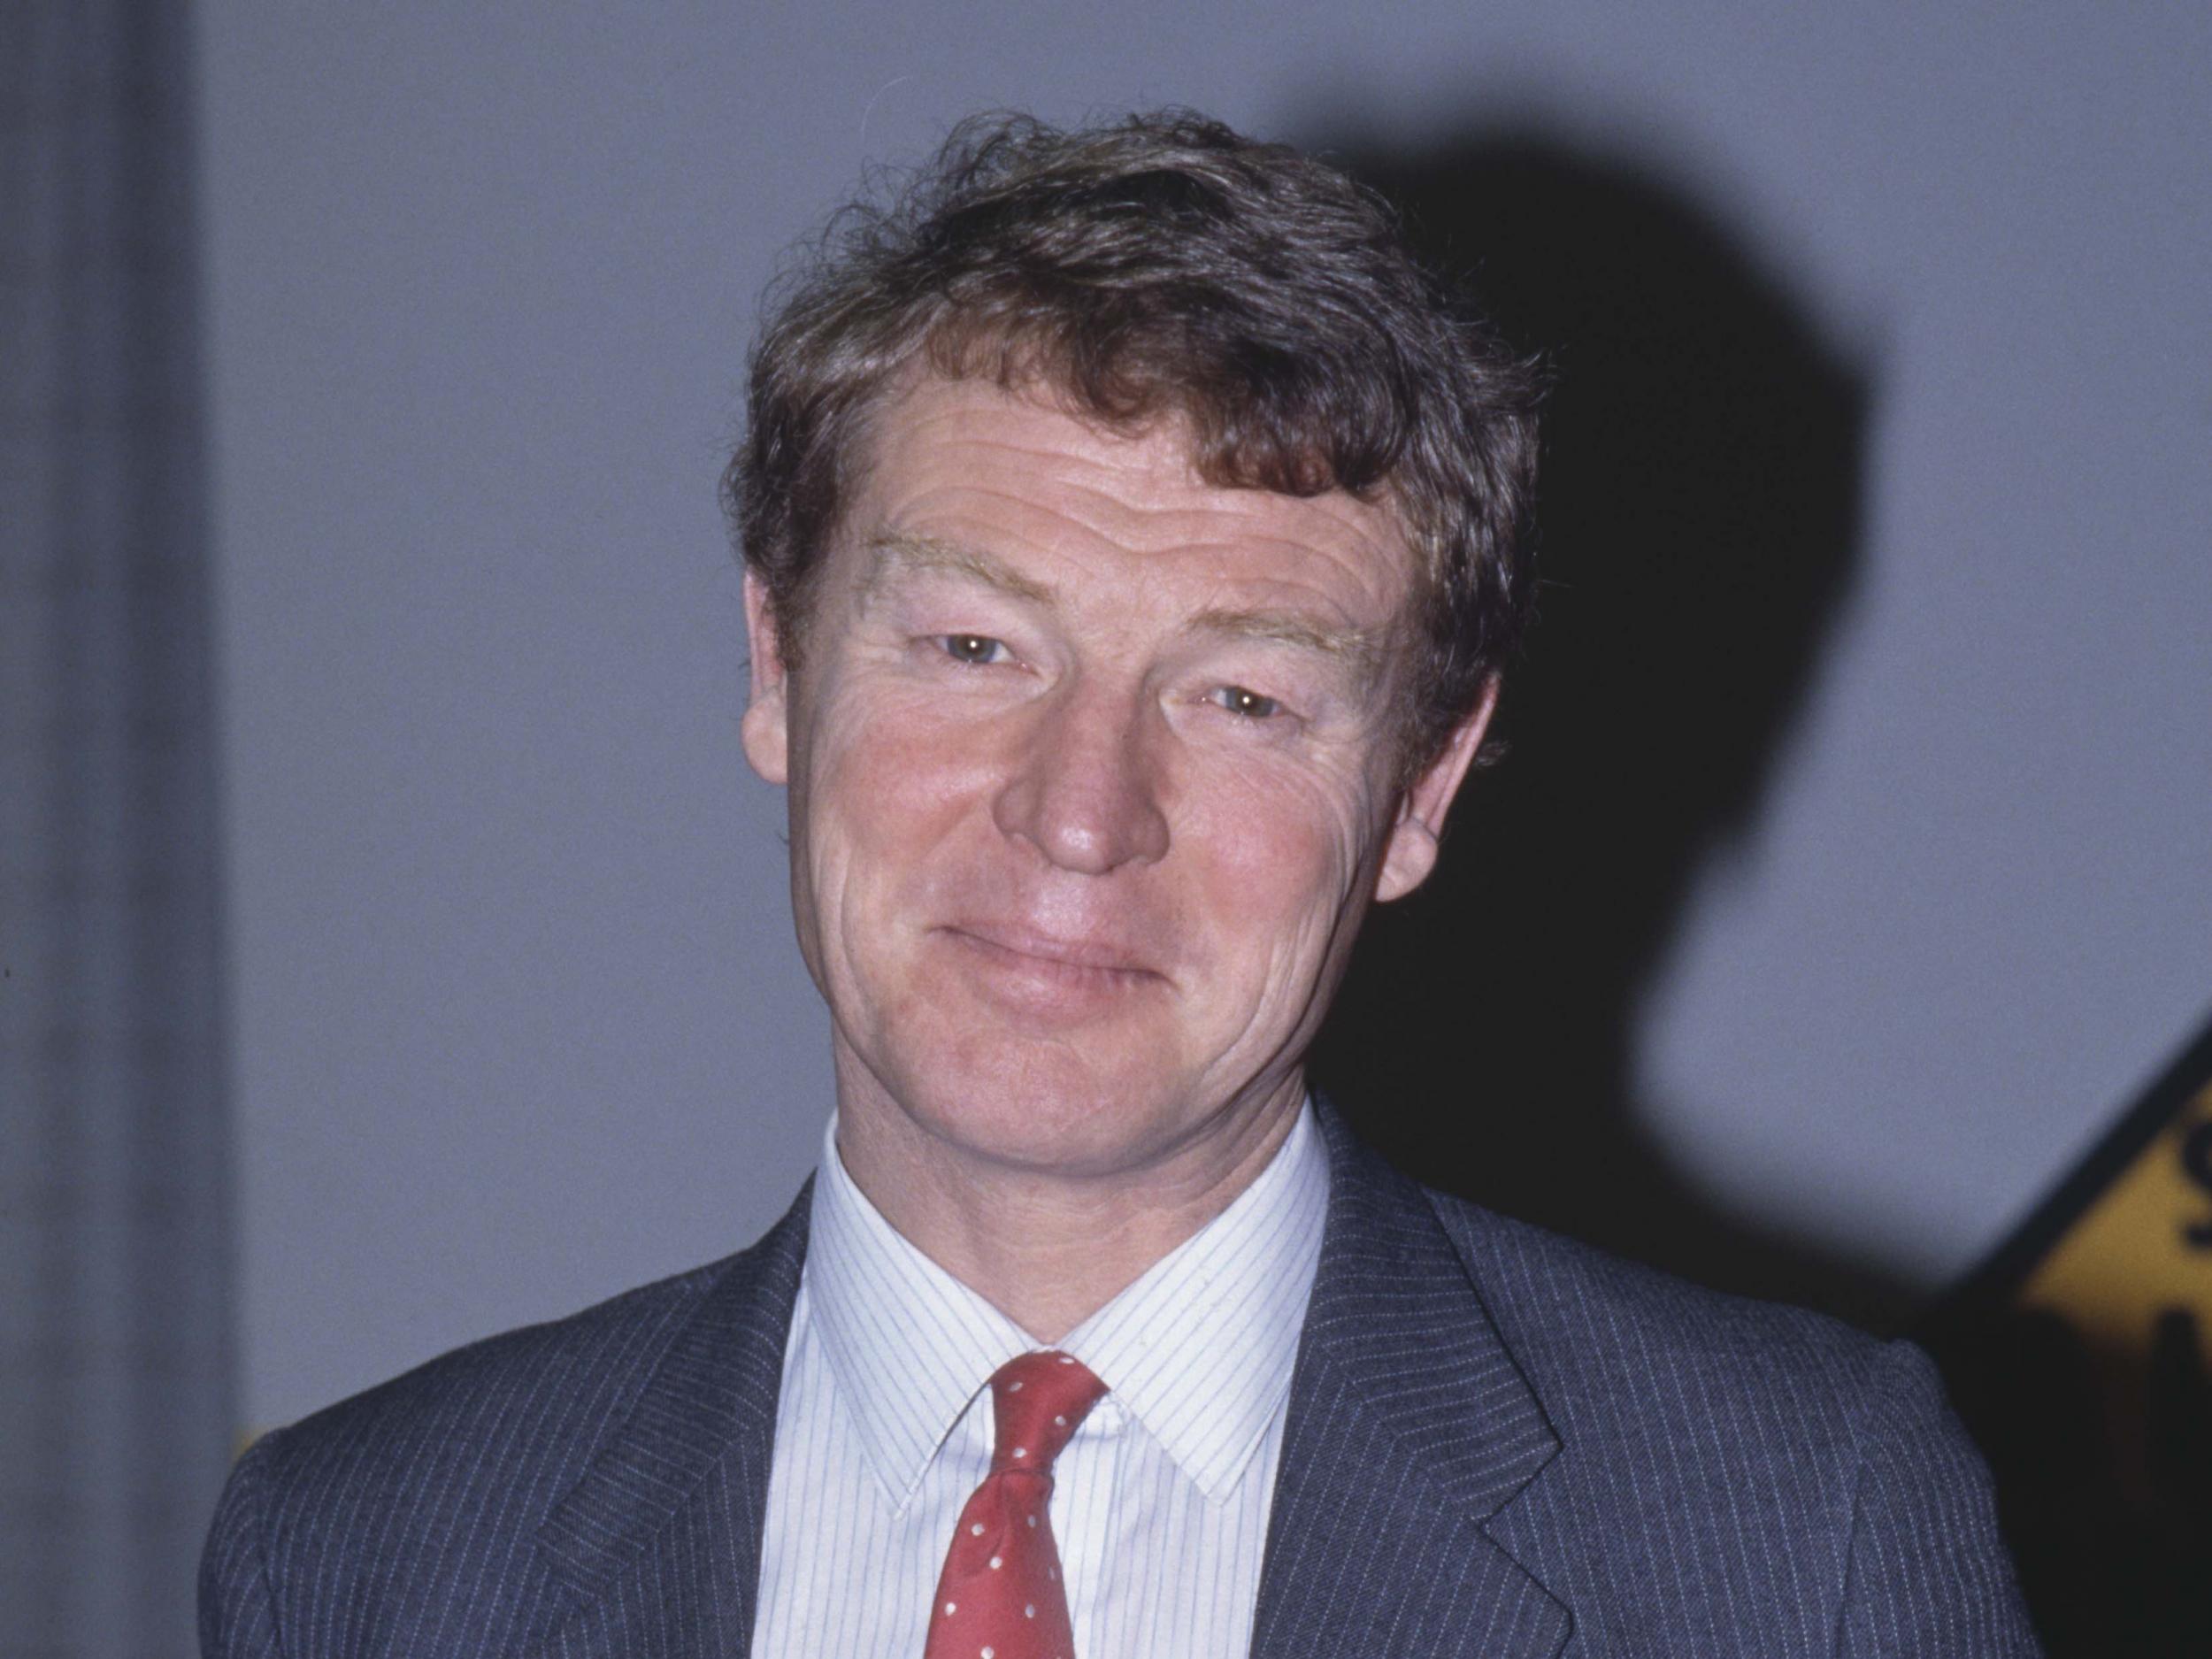 In March 1988 Paddy Ashdown became the first leader of a party that has exerted significant influence on British politics